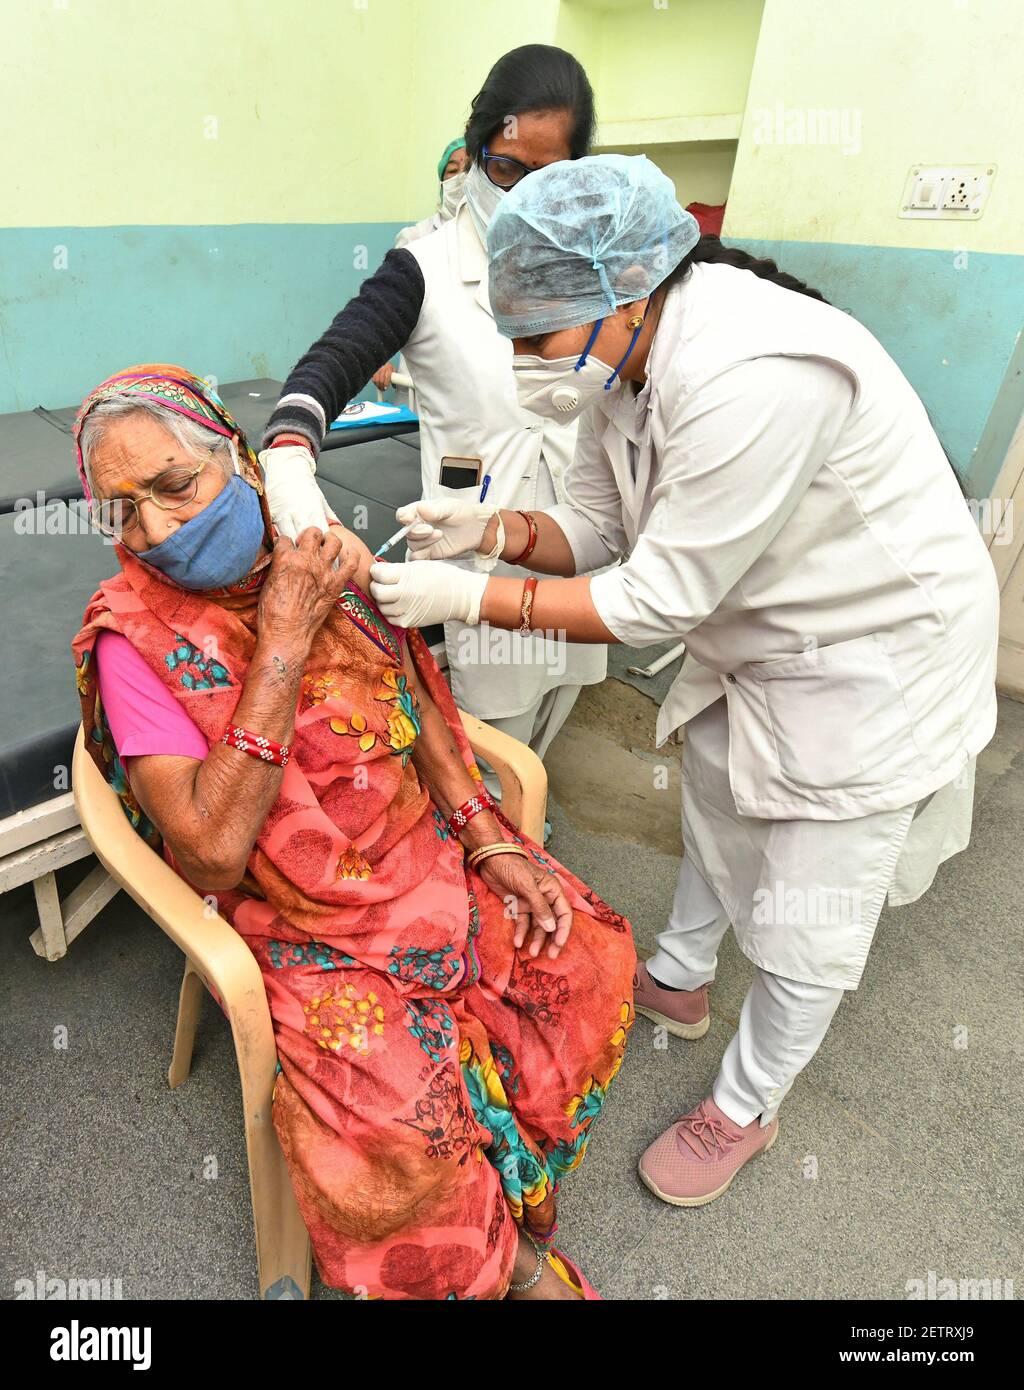 Beawar, Rajasthan, India, March 2, 2021: An elderly woman being administered COVID-19 vaccine, during a countrywide inoculation drive, at Government hospital in Beawar. The second phase of the Covid-19 vaccination drive started for people 60 years of age and above. 70 years old Indian Prime Minister Narendra Modi also received his first dose of Corona vaccine at AIIMS in New Delhi on Monday. Credit: Sumit Saraswat/Alamy Live News Stock Photo